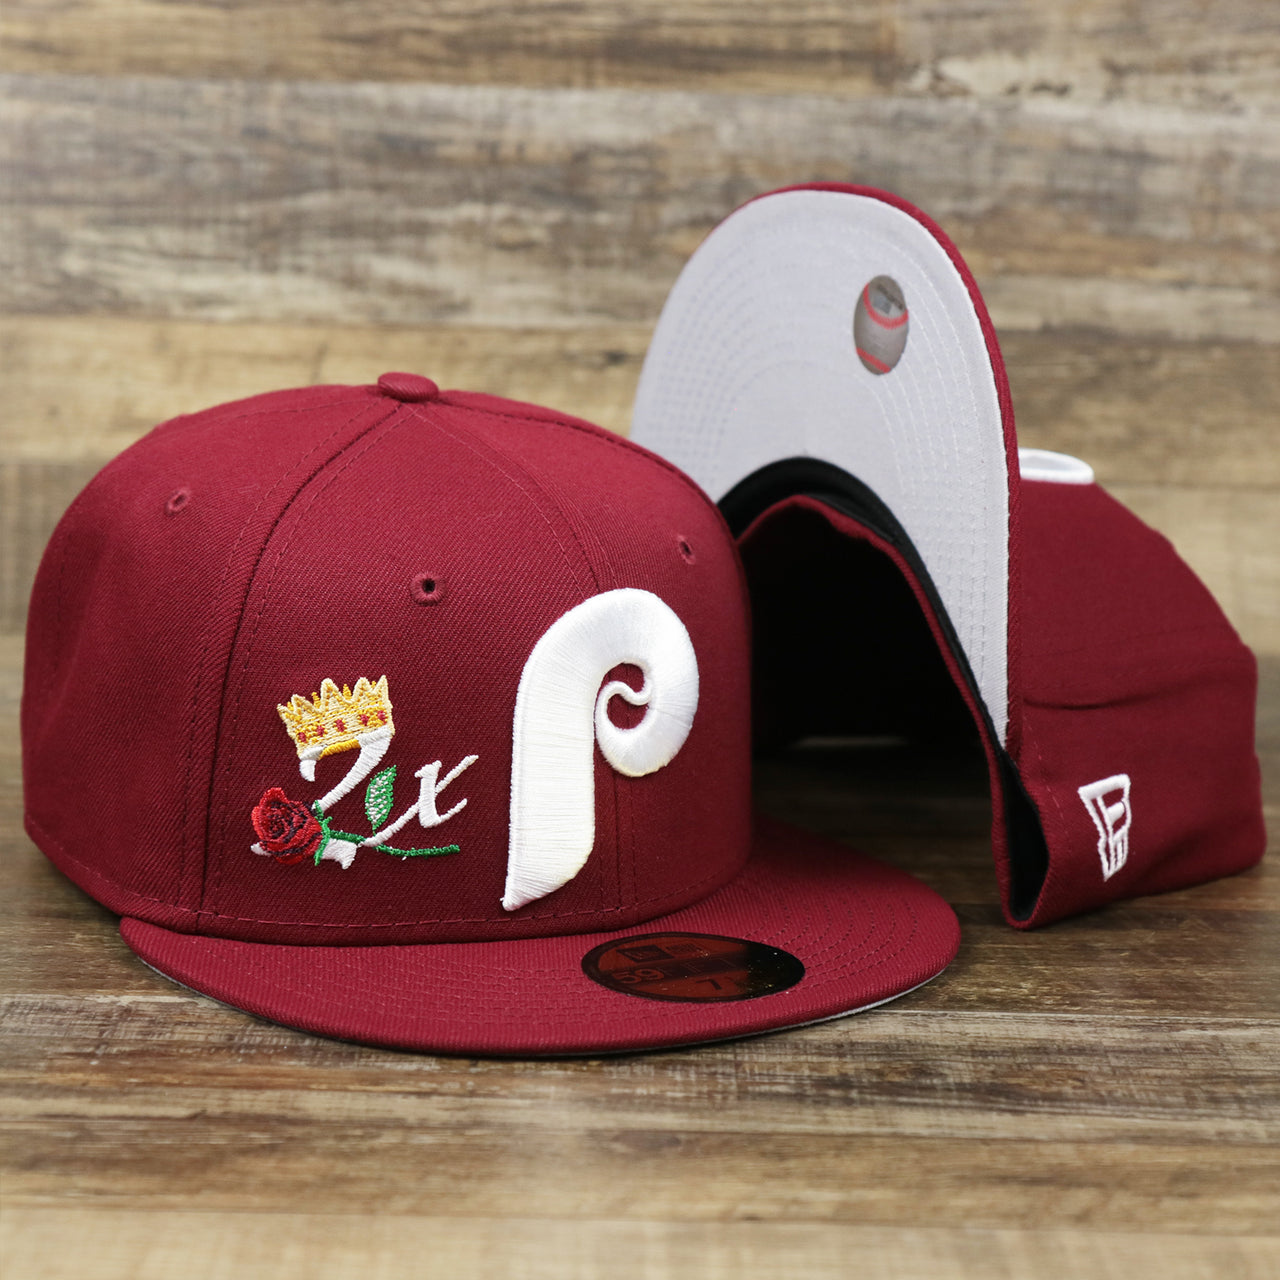 The Cooperstown Philadelphia Phillies Crown Champions Gray Bottom World Championship Wins Embroidered Fitted Cap | Maroon 59Fifty Cap